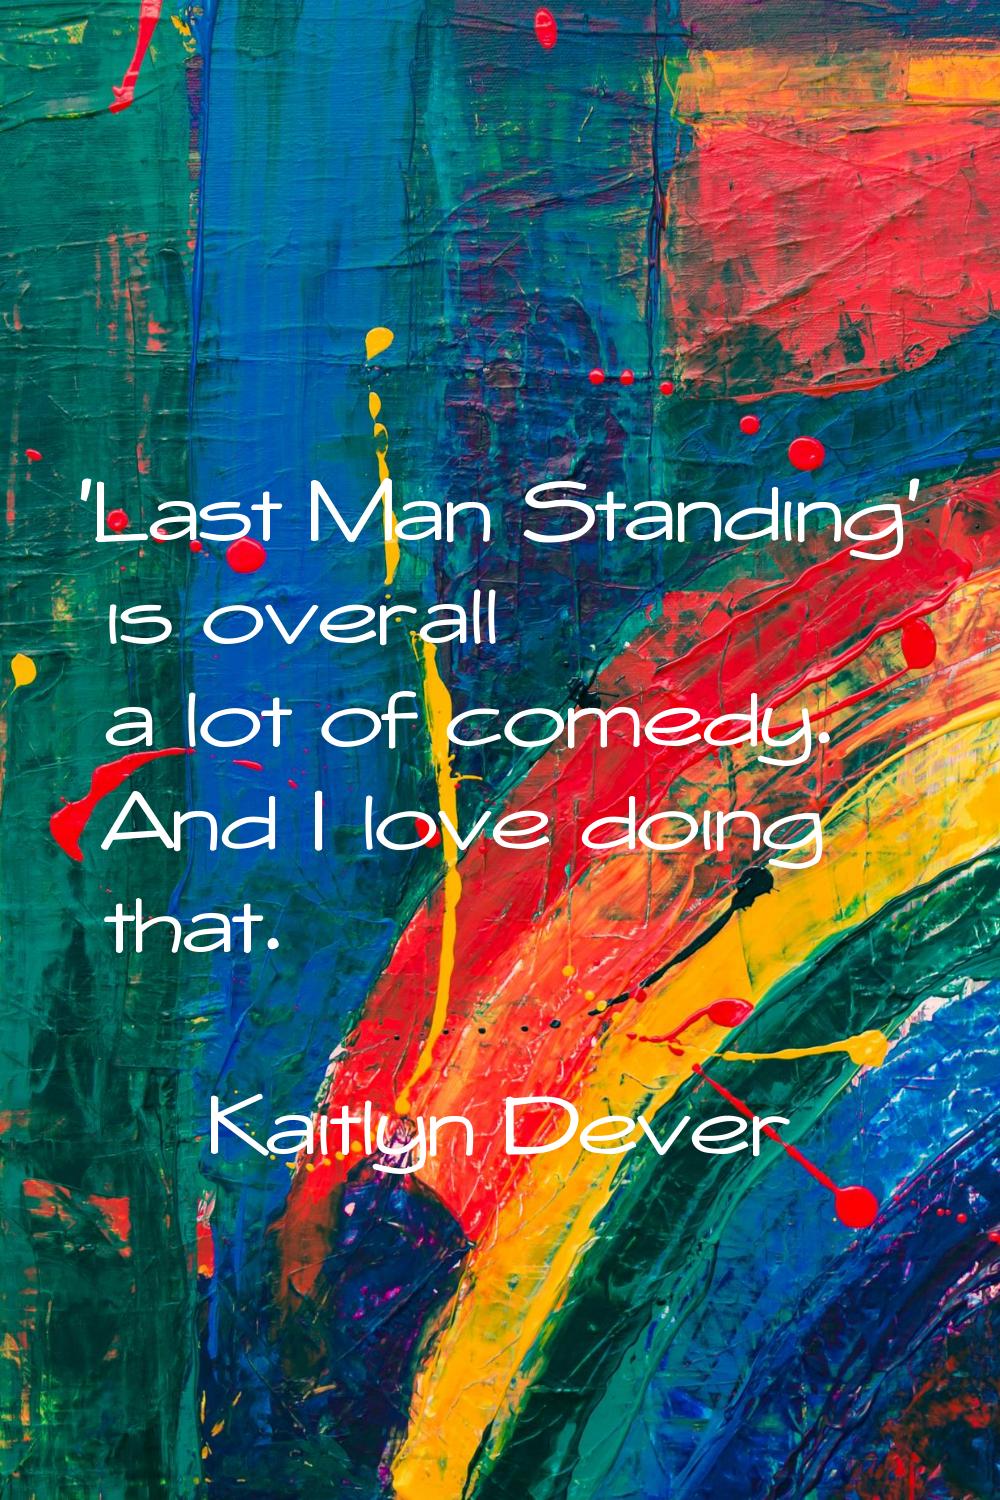 'Last Man Standing' is overall a lot of comedy. And I love doing that.